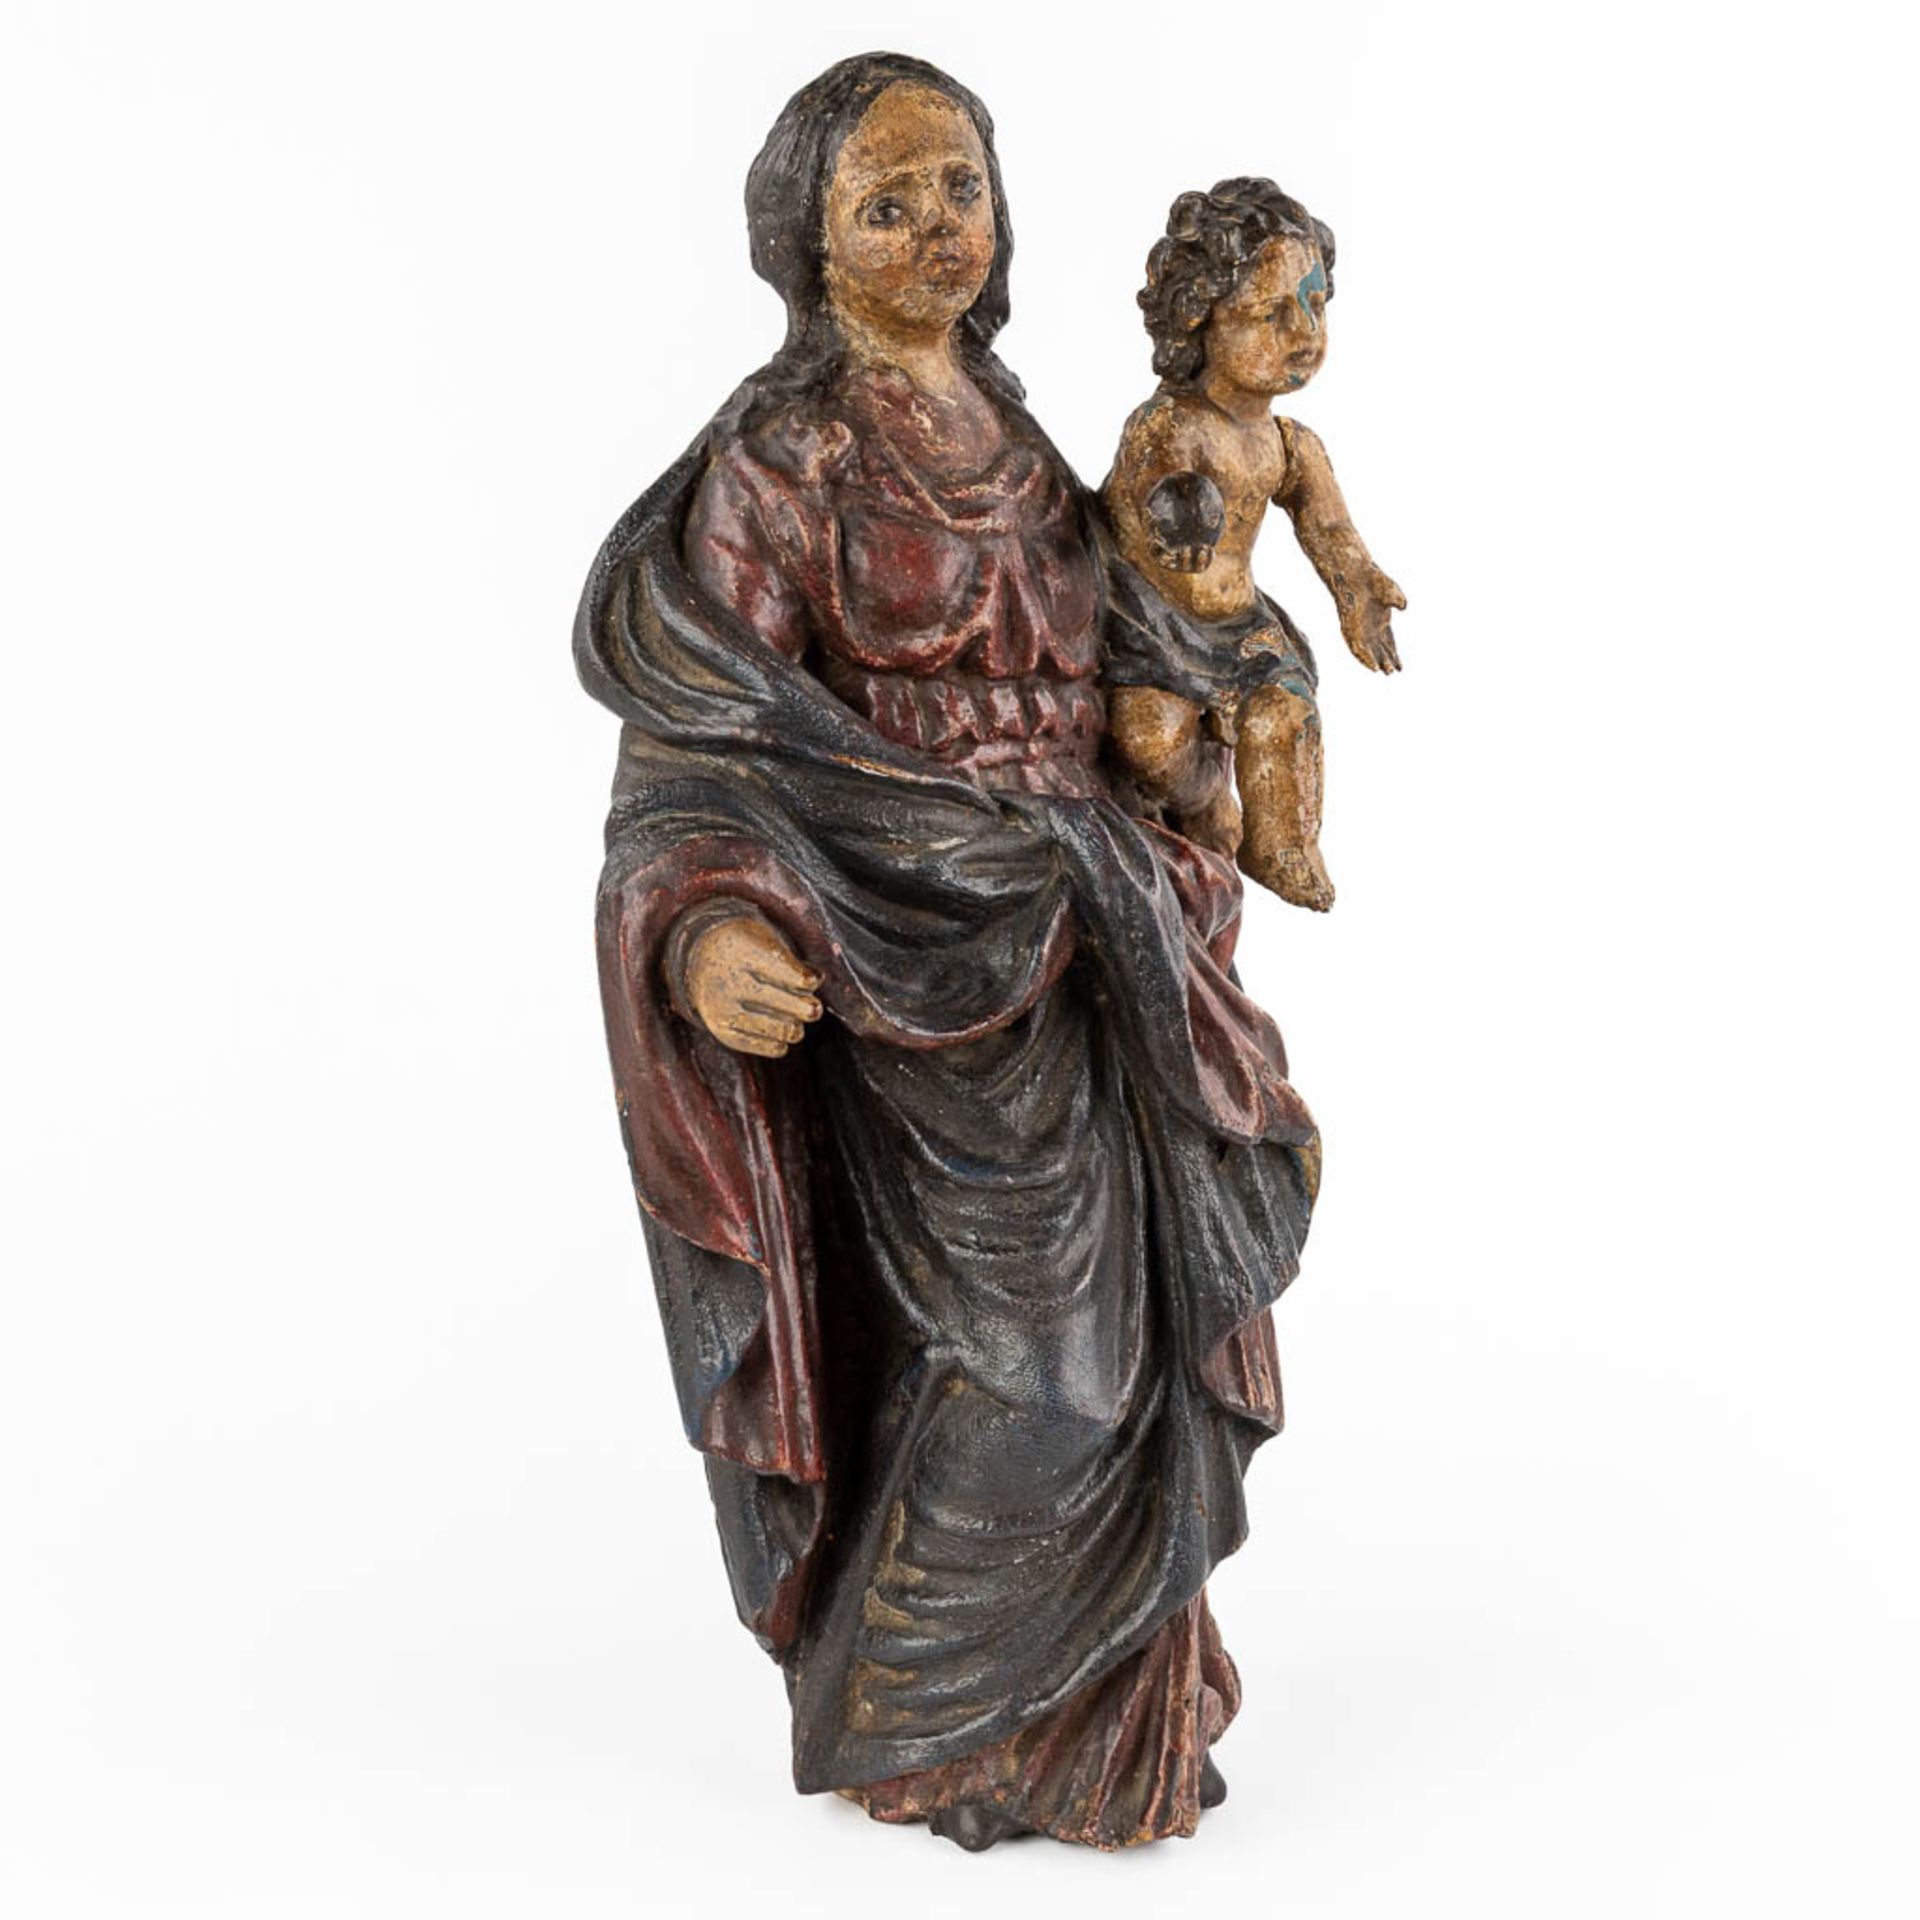 An antique figurine of Madonna with child, polychrome. 17th/18th C. (W:24 x H:46 cm) - Image 3 of 13